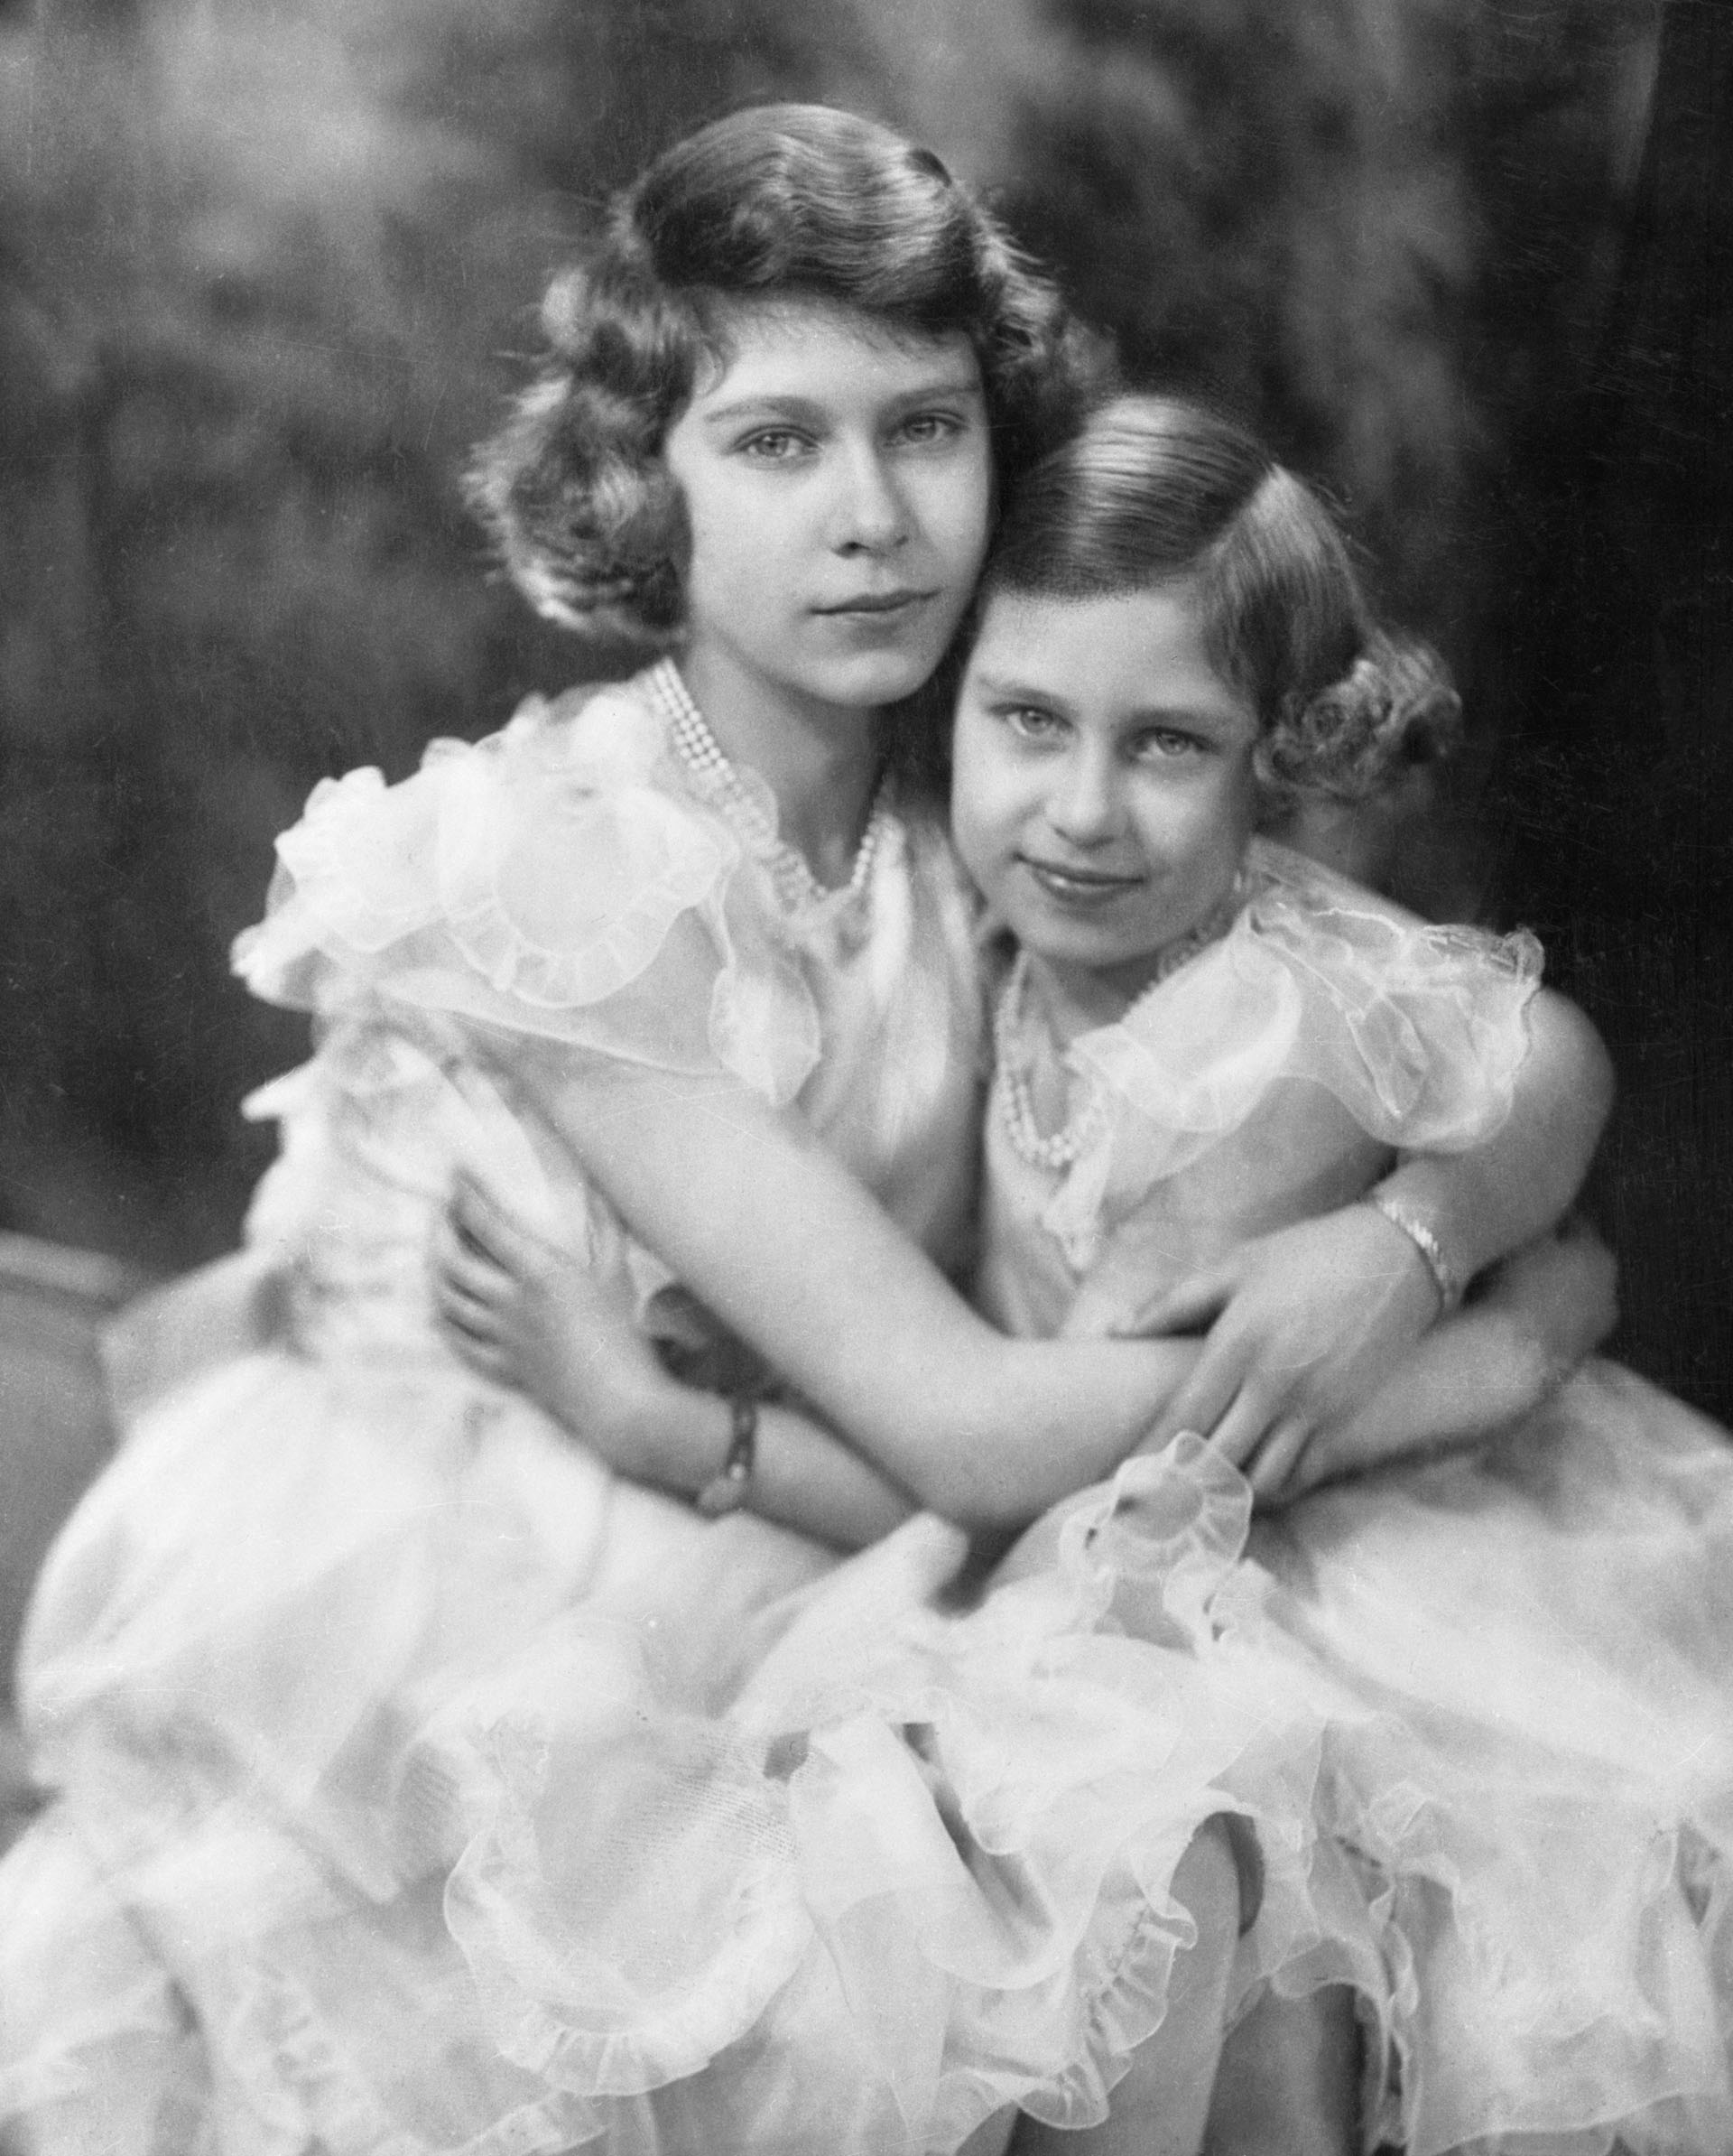 London, England: Latest Portrait Of Britain's Princesses--From war pressed England comes this charming photograph of her two best loved young ladies--the two young Princesses, daughters of King George VI. This portrait was made April 17th 1940, on the fourteenth birthday of Princess Elizabeth, who is heiress presumptive of the British Crown. Little Princess Margaret Rose is nine years old.